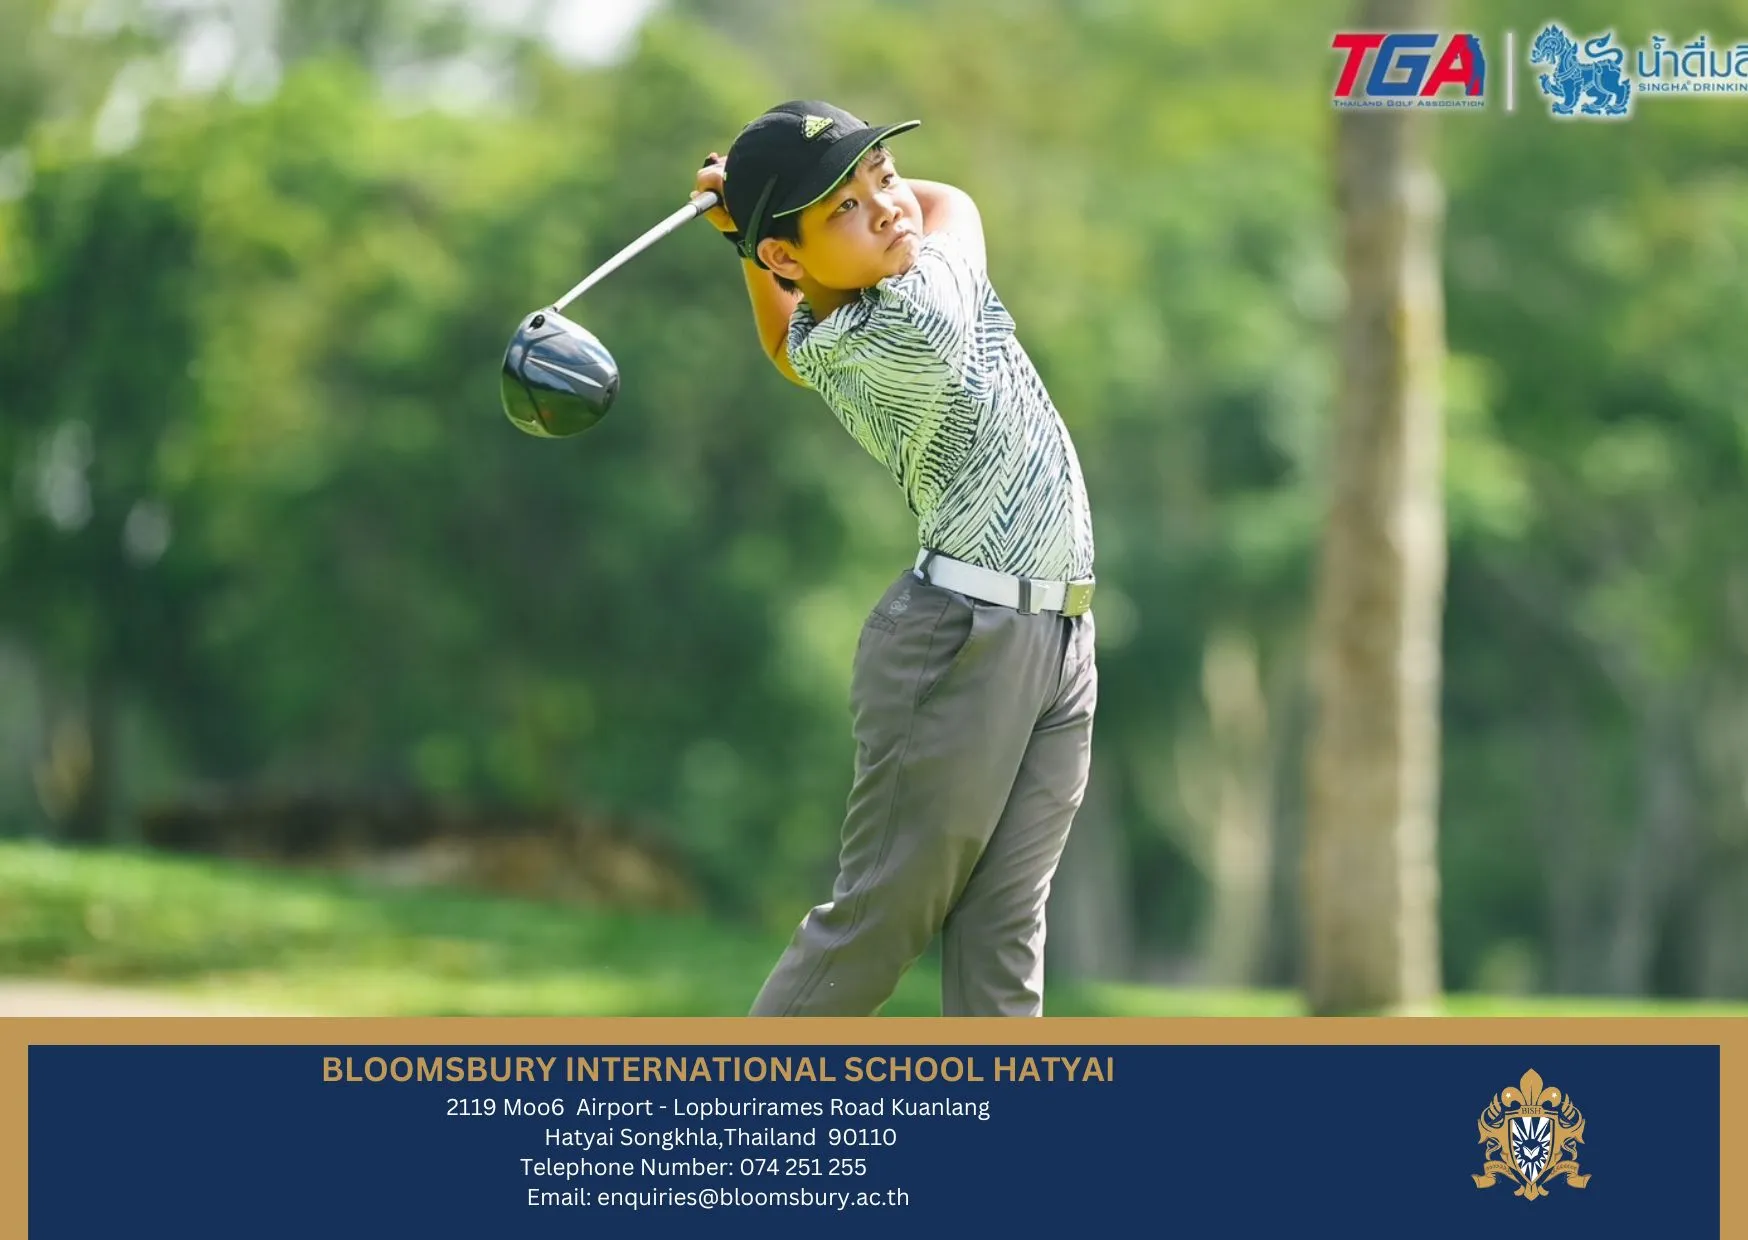 Best, second place in the TGA- Singha Junior Golf Ranking 2024-2025 in Phuket